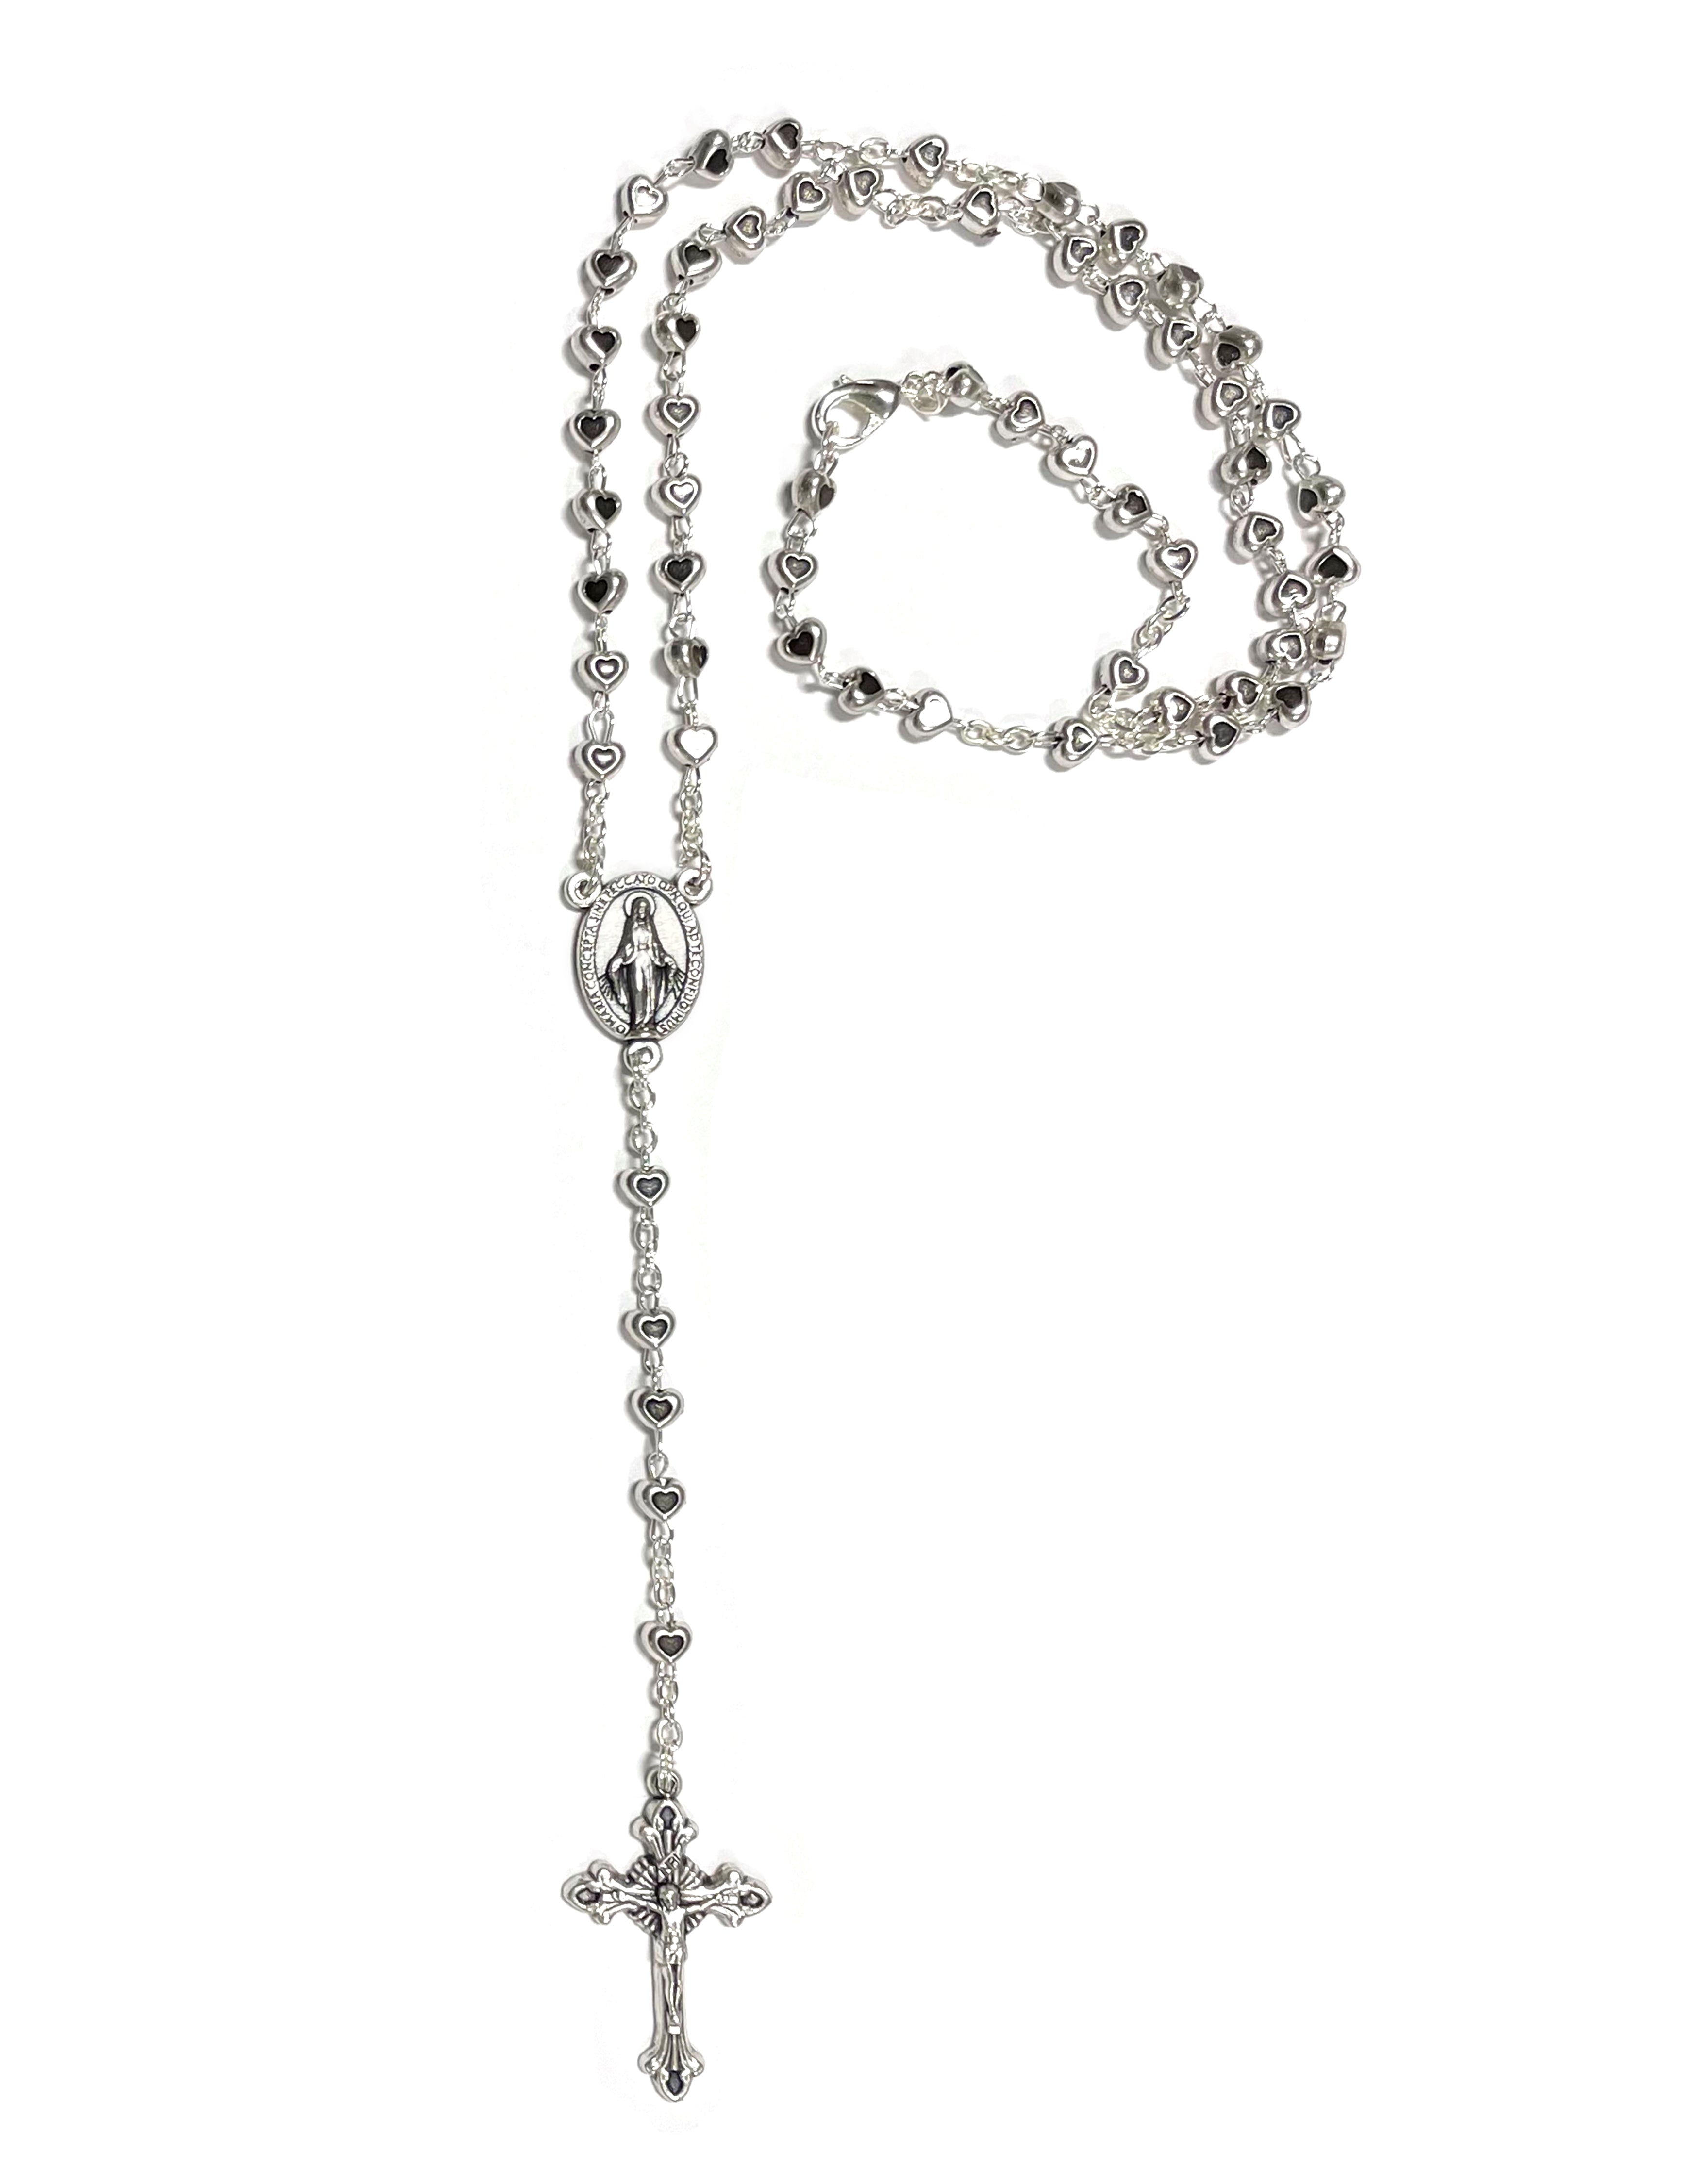 Rosary of the Miraculous medal with beads in the shape of hearts